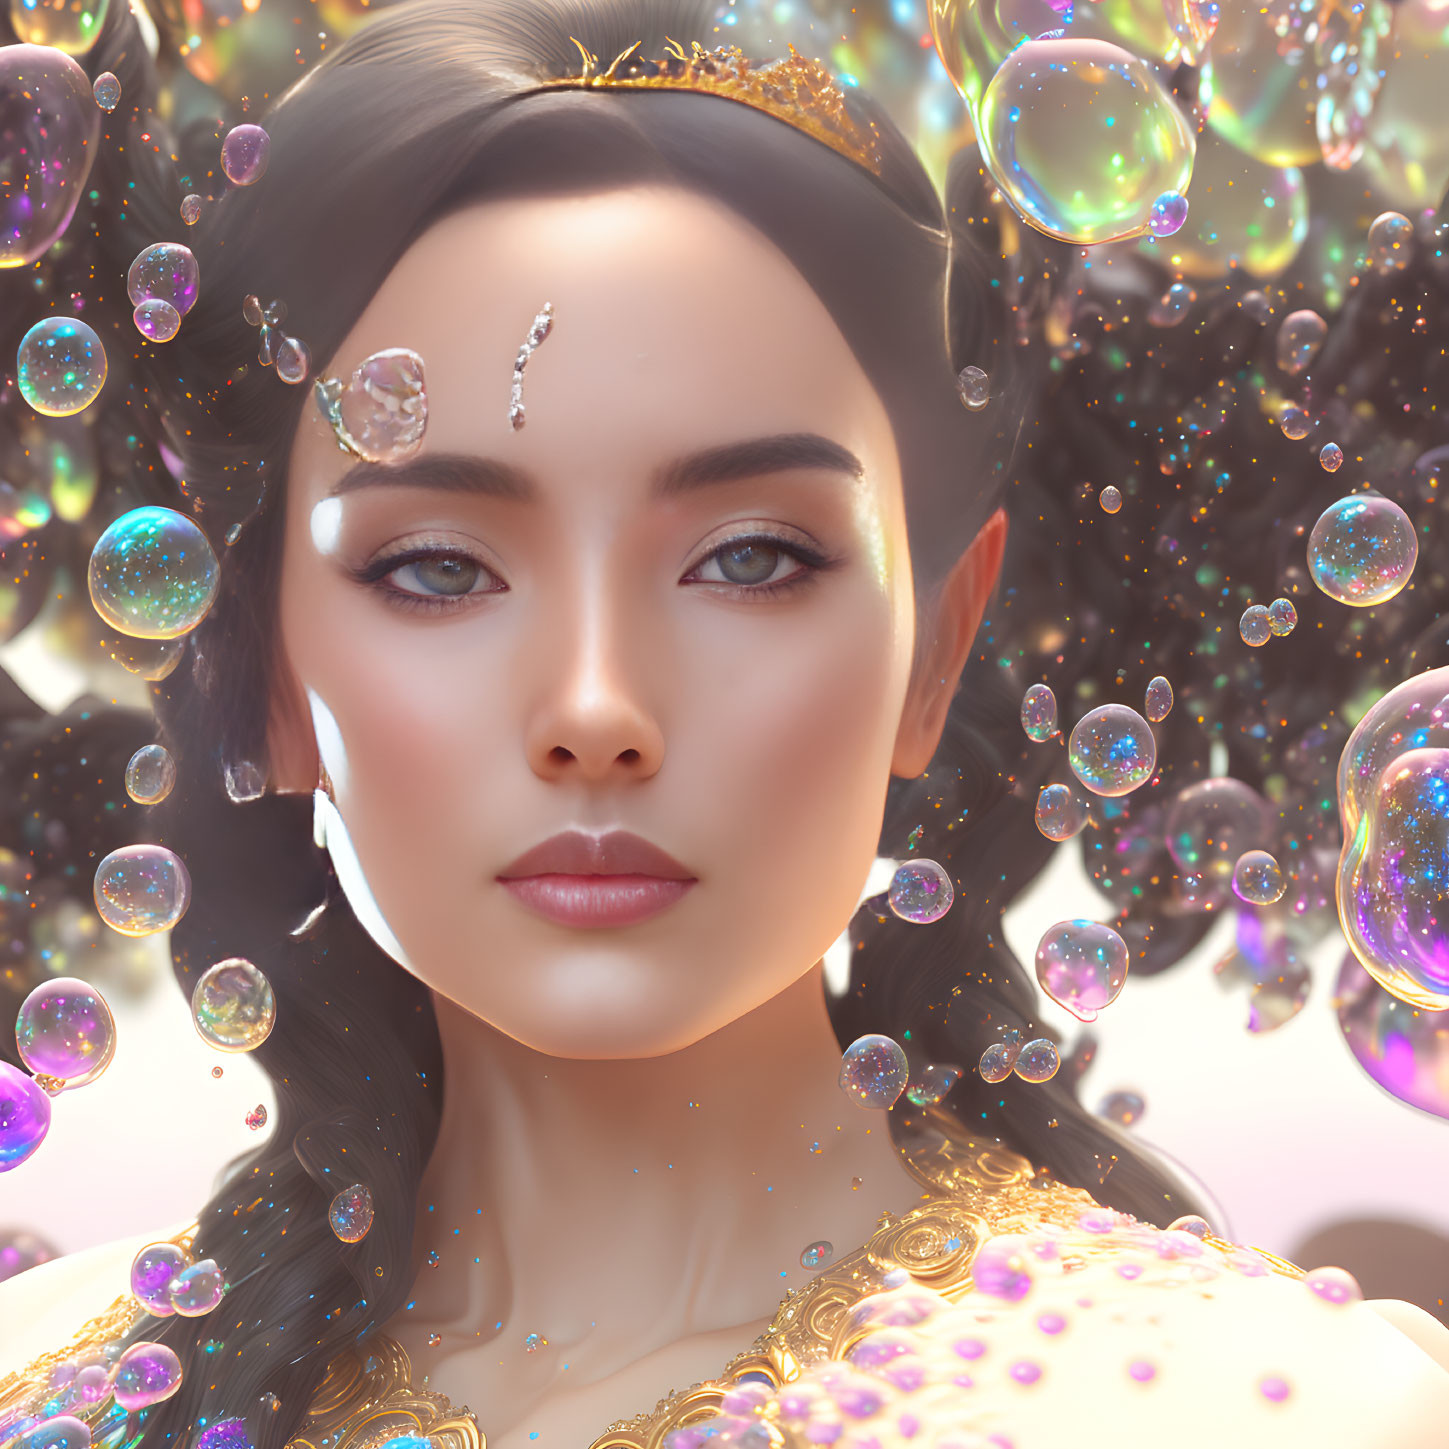 Decorative headpiece on serene woman surrounded by iridescent bubbles